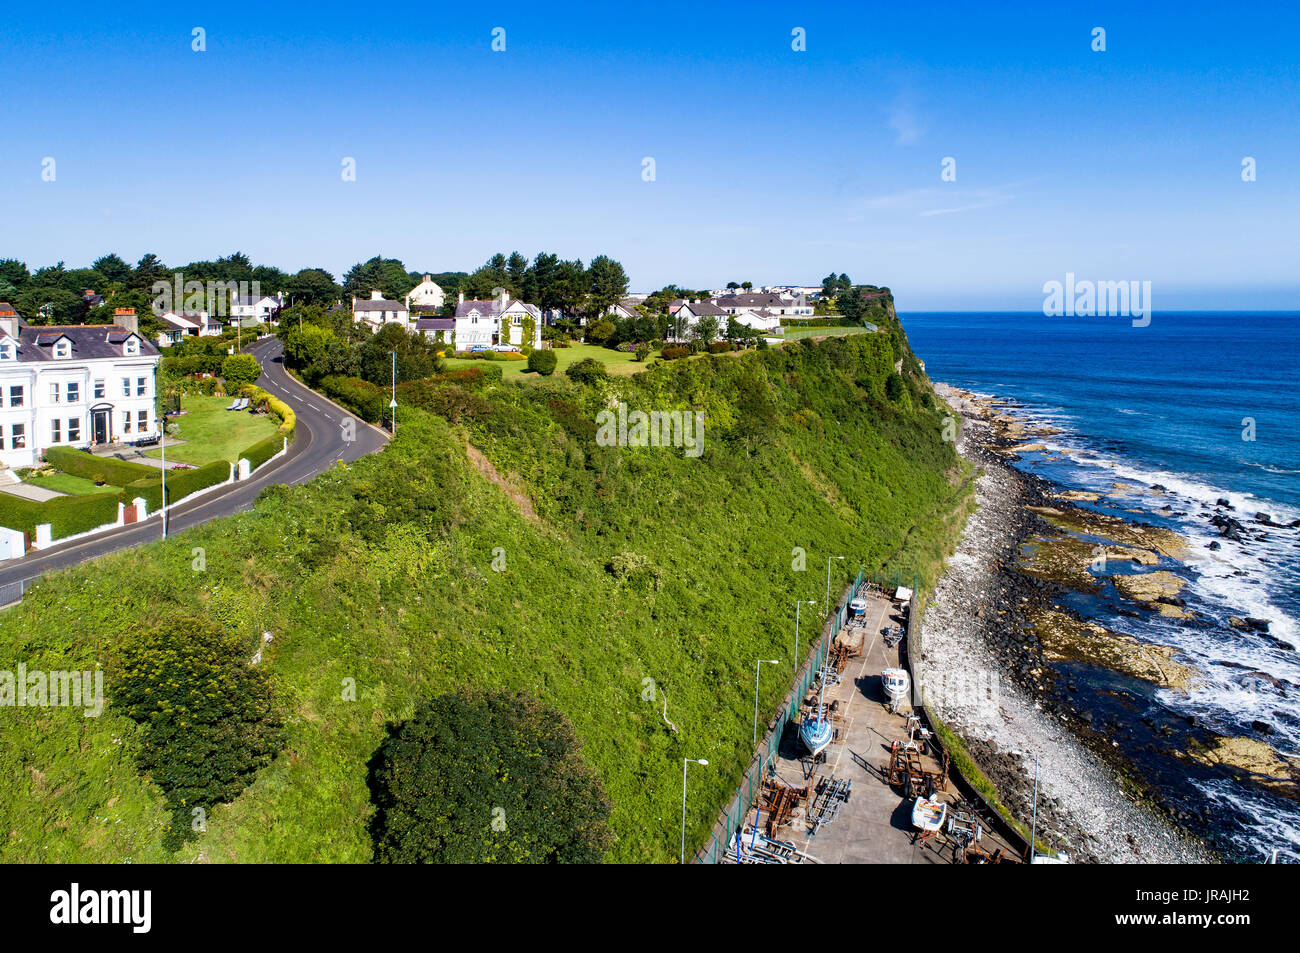 Atlantic coast with a steep cliff, marina and Causeway Coastal Road at Ballycastle, County Antrim, Northern Ireland, UK. Aerial view Stock Photo